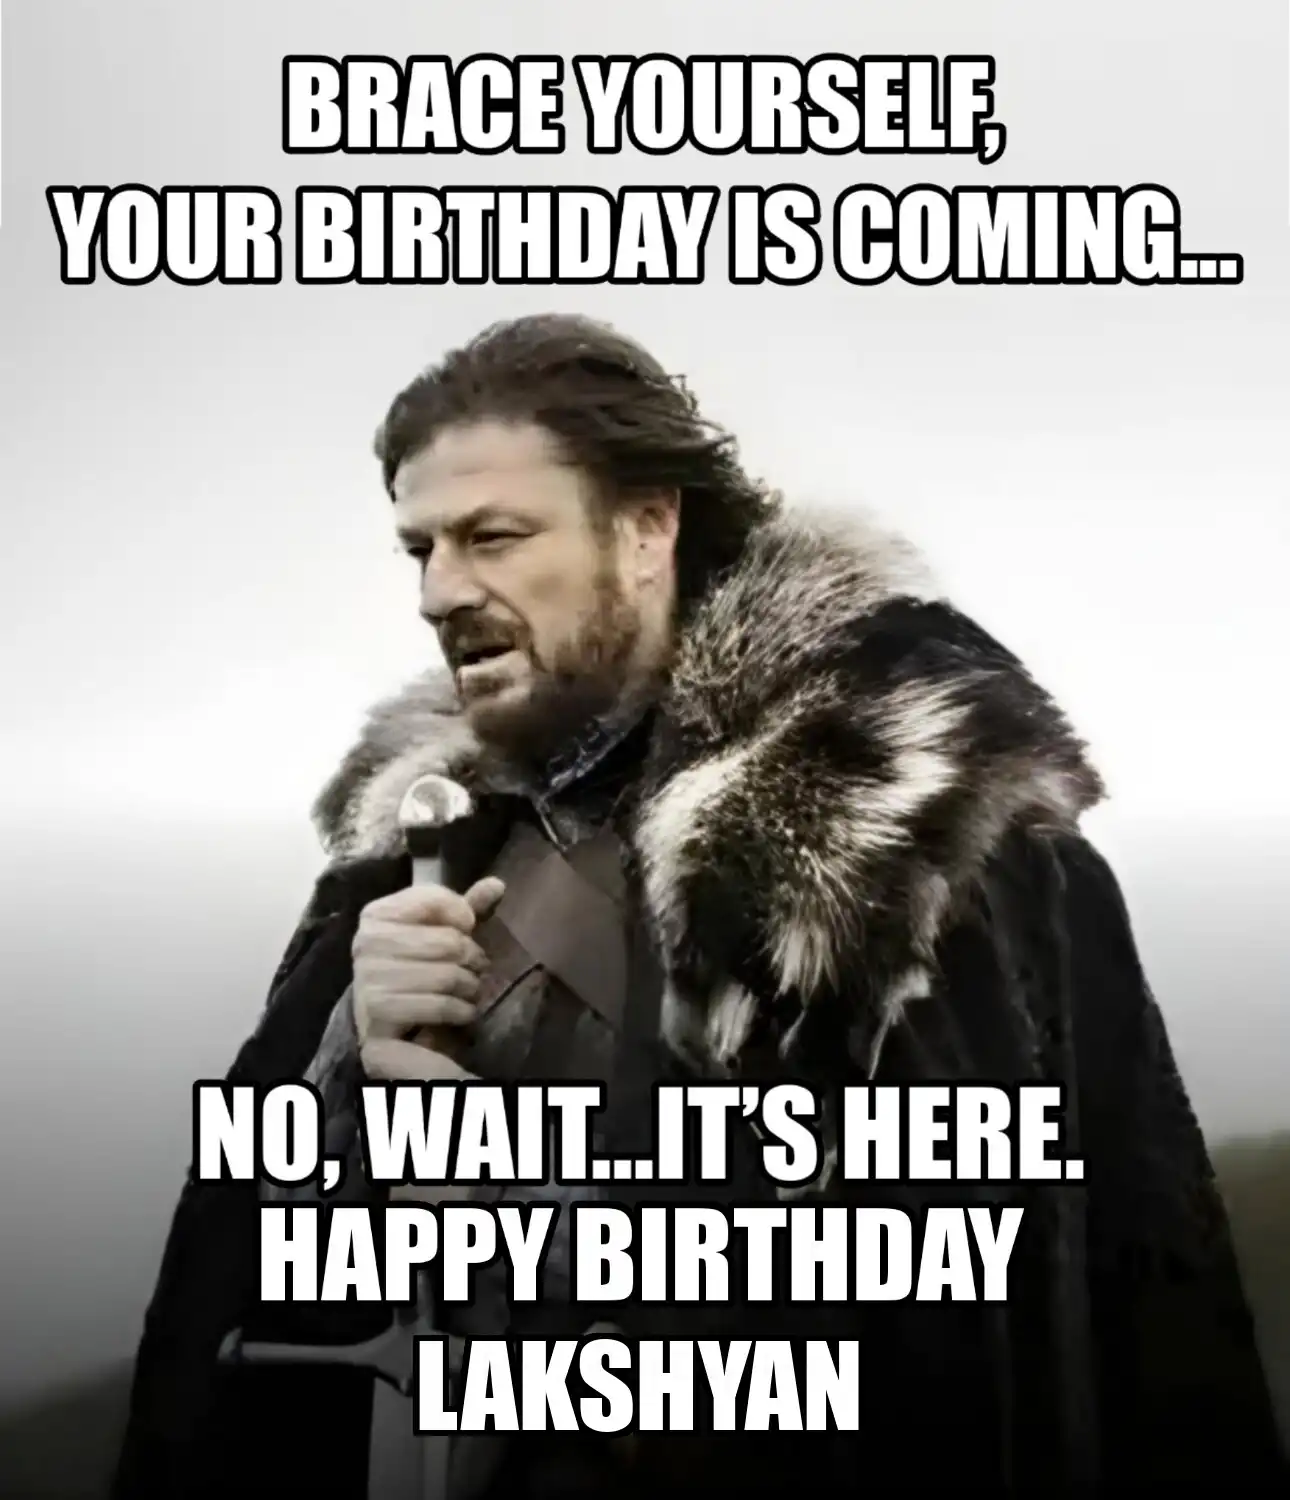 Happy Birthday Lakshyan Brace Yourself Your Birthday Is Coming Meme